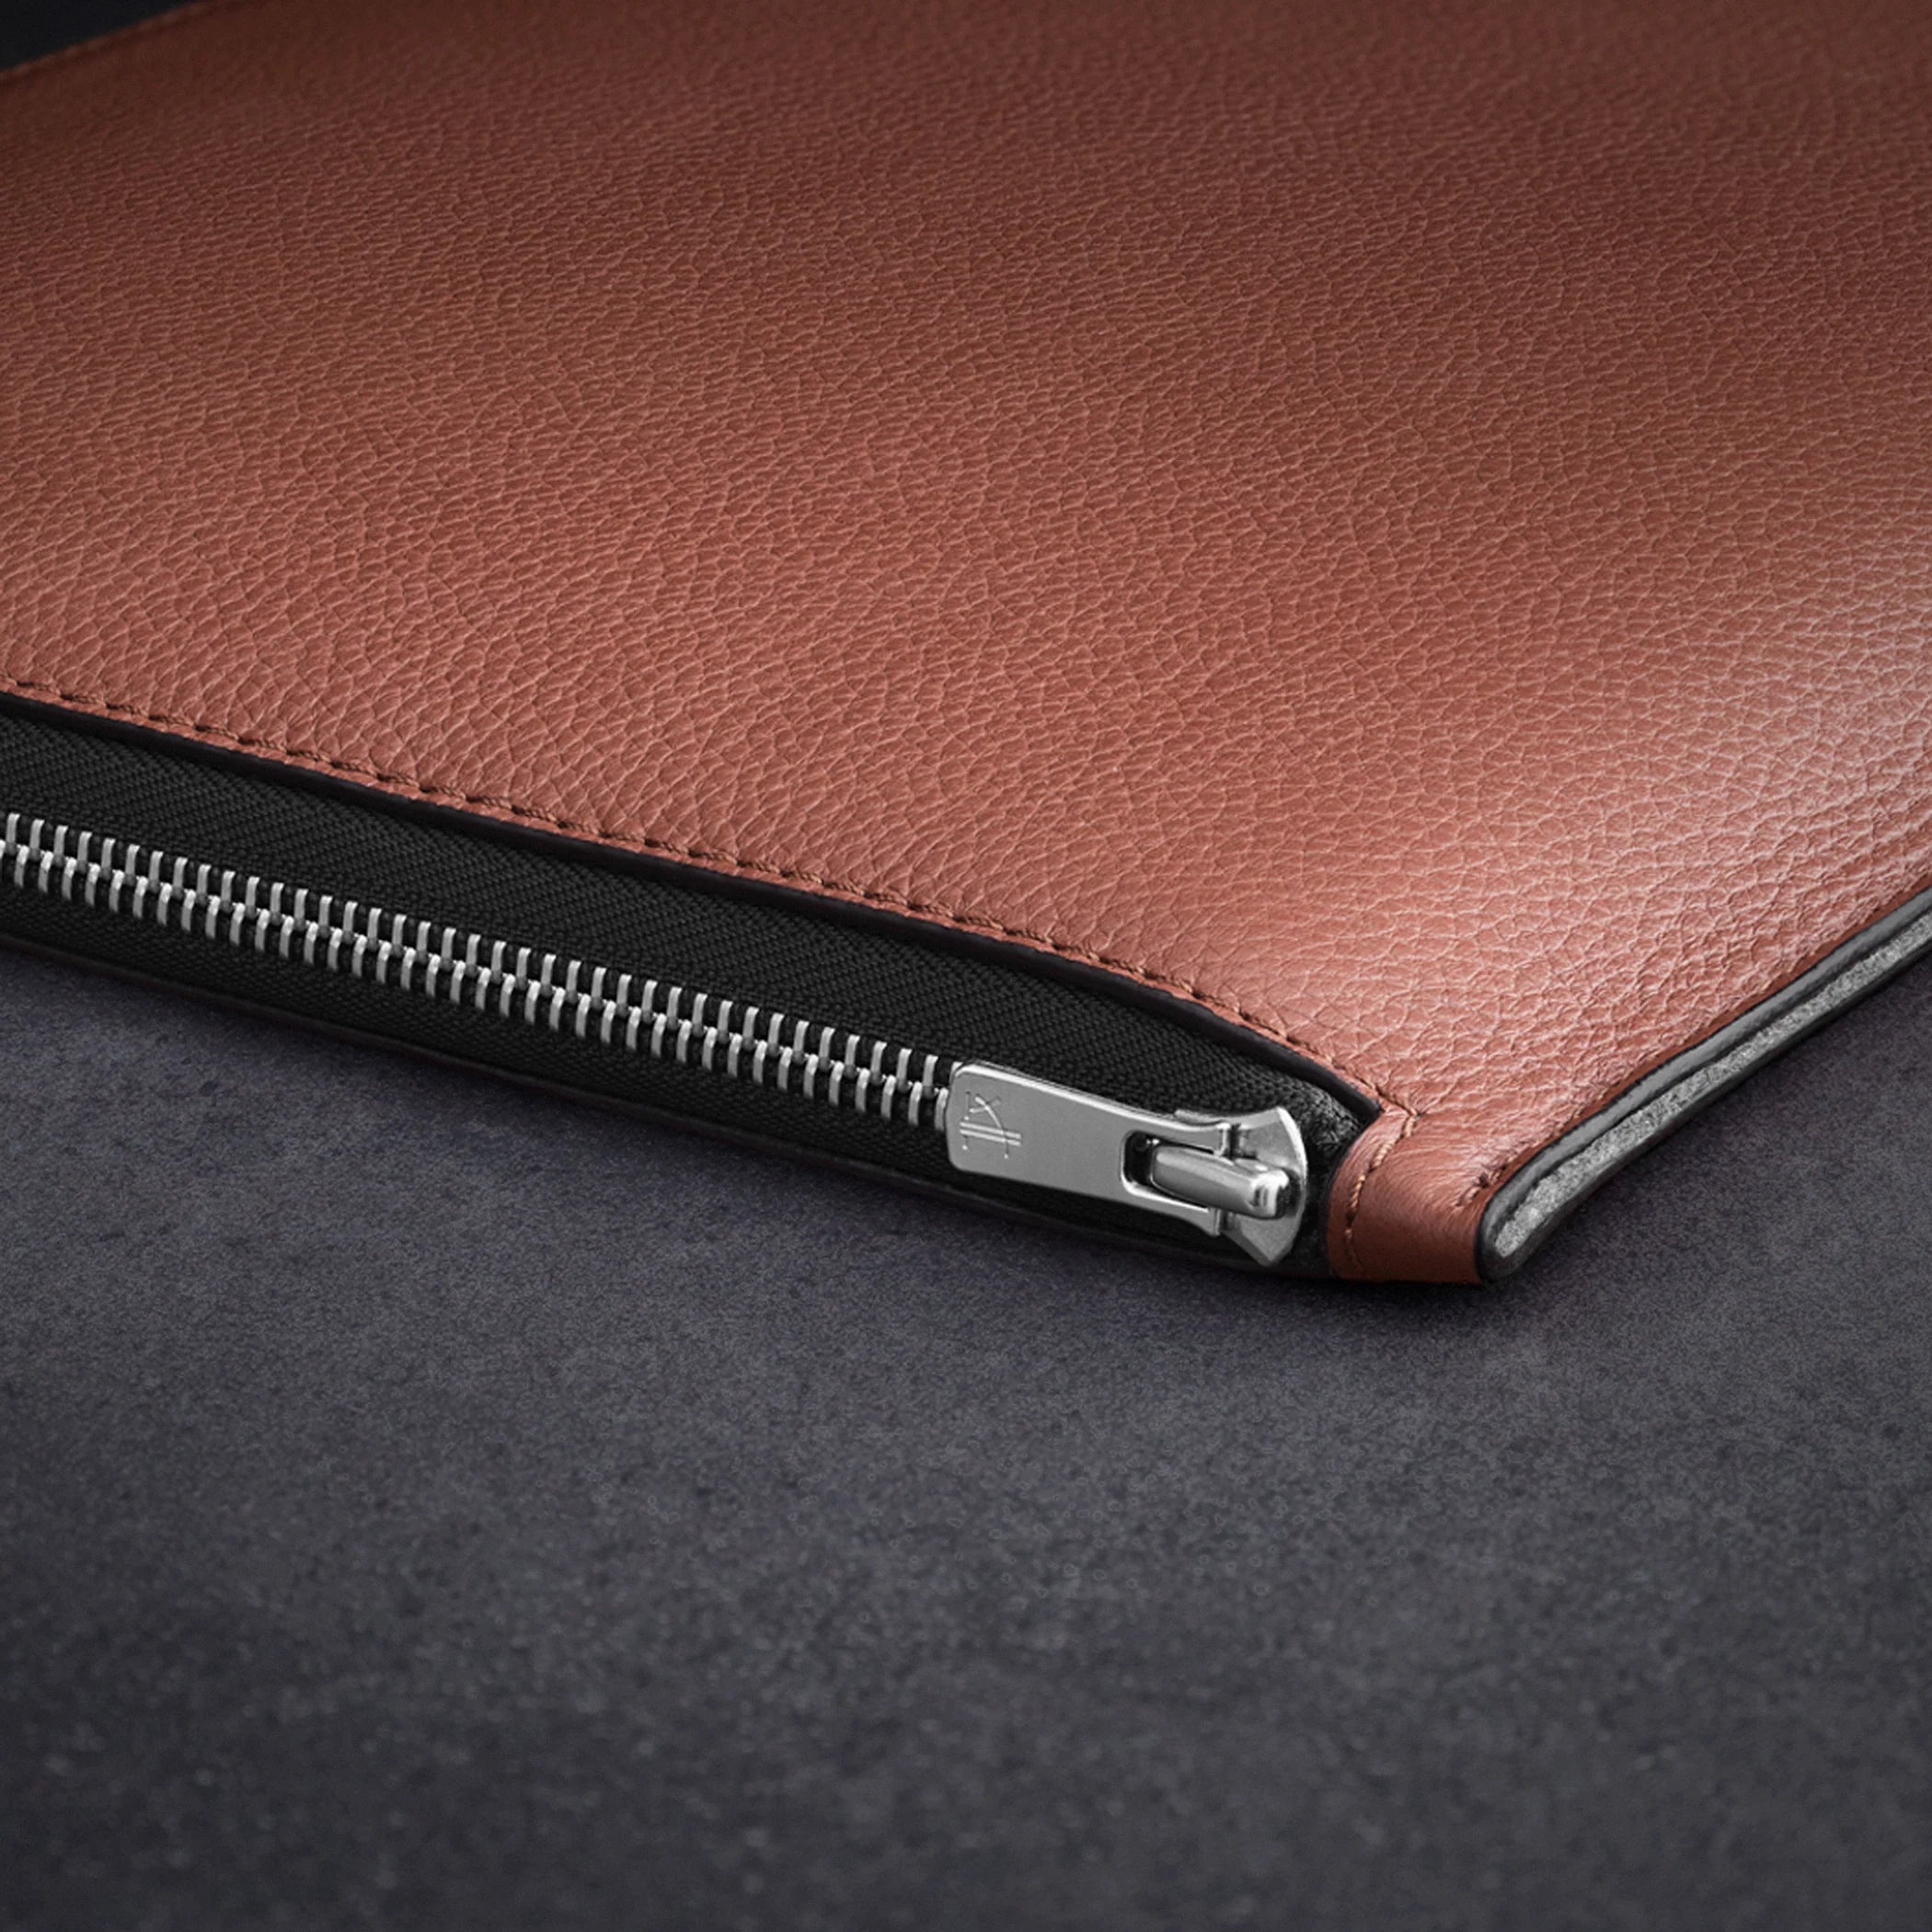 A WOOLNUT Leather Folio for 13 / 14-inch MacBook in Cognac feature with notebook, pen and pensil around